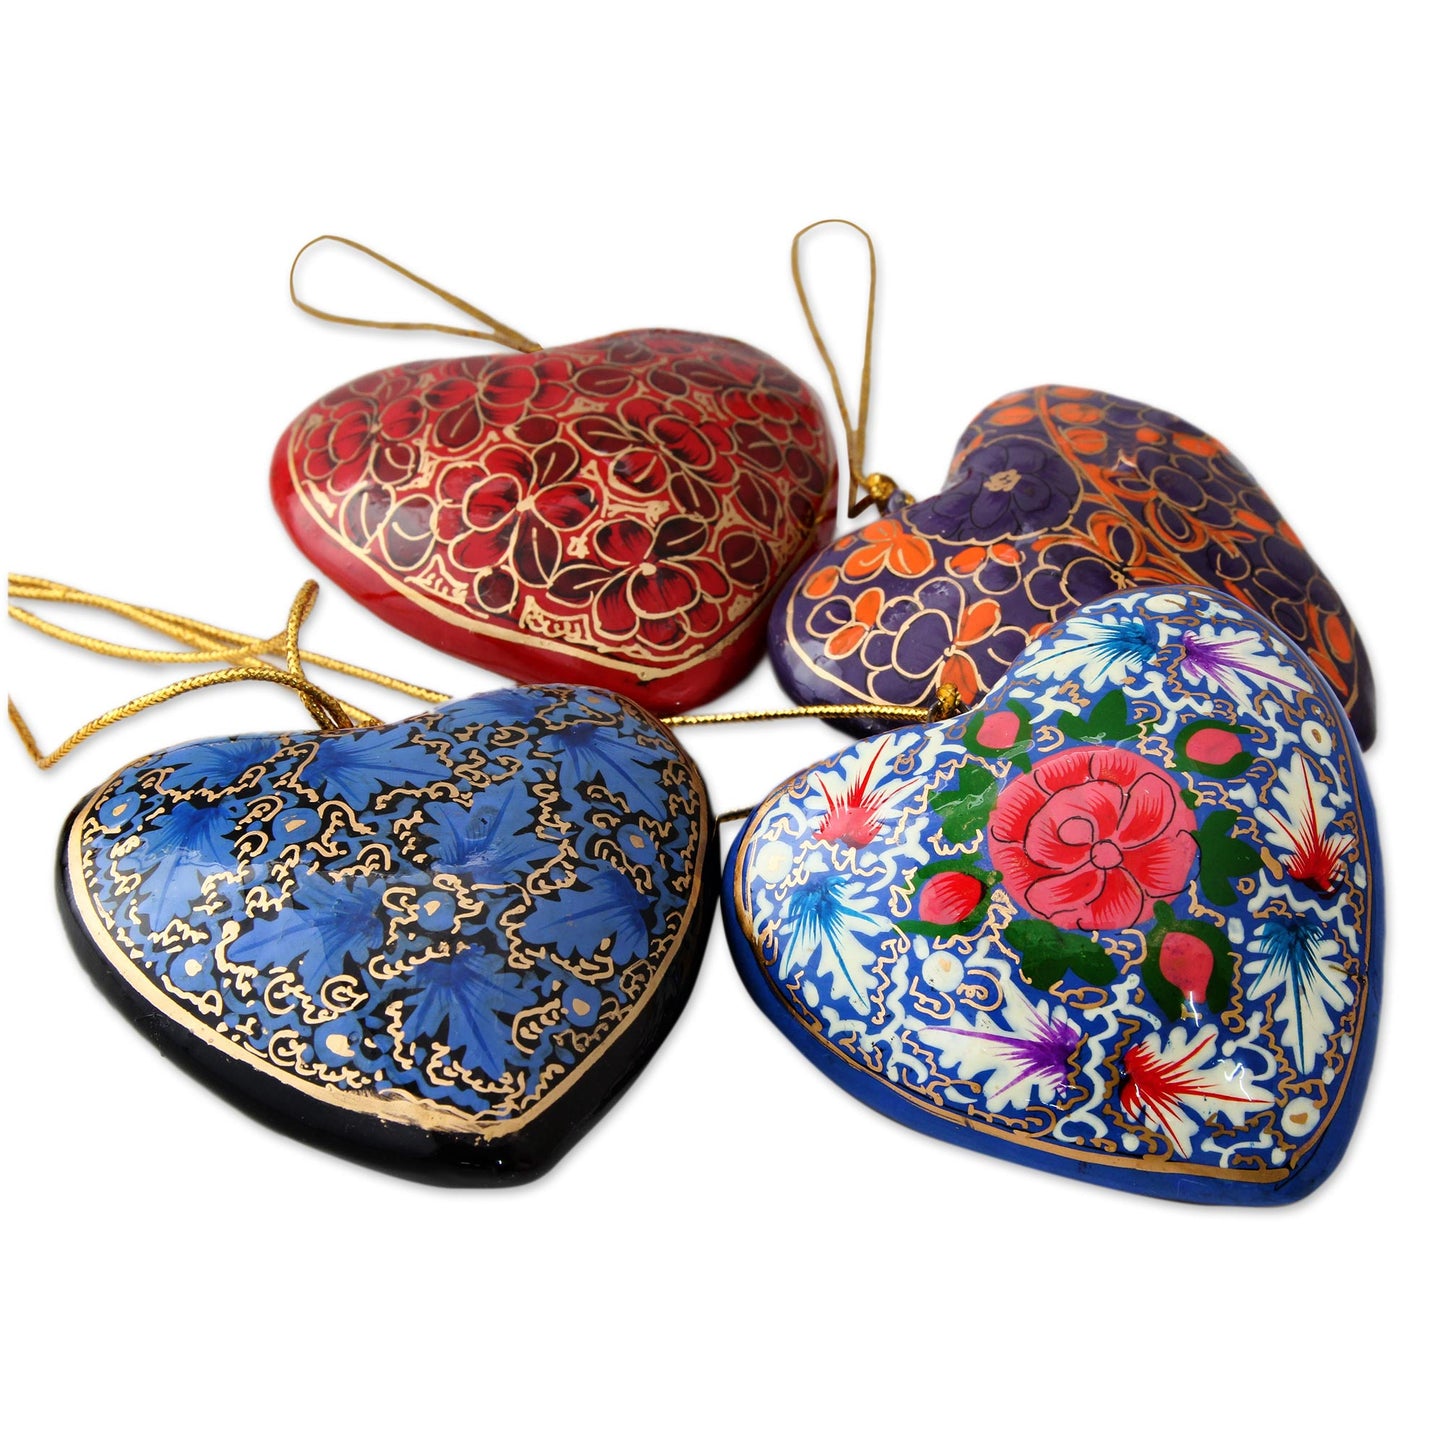 Bouquet of Hearts 4 Artisan Crafted Papier Mache Ornaments Flower Hearts Set